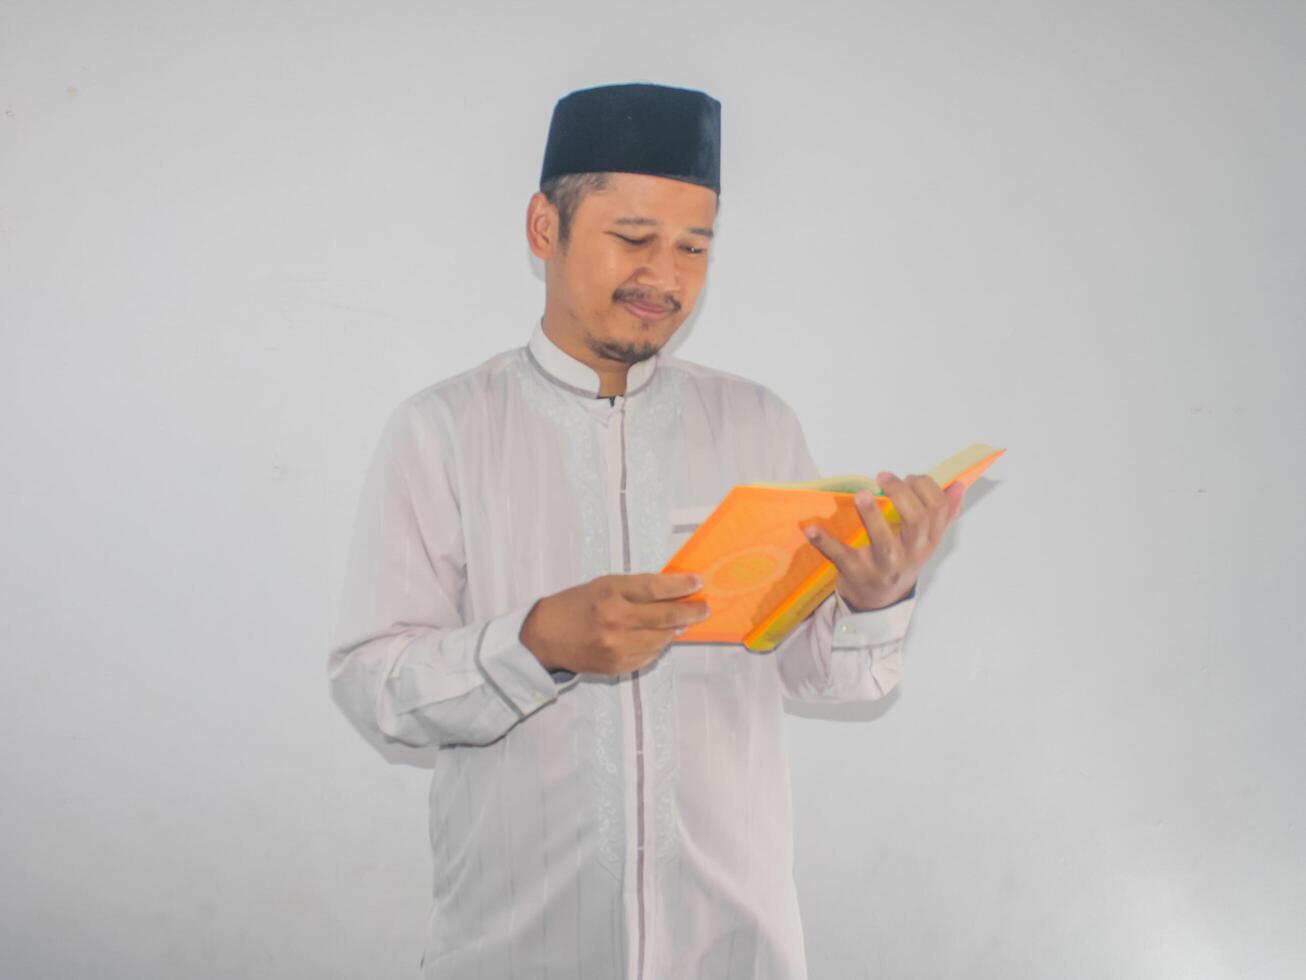 Moslem Asian man smiling at the Al Qur'an and while holding a Al-Qur'an photo